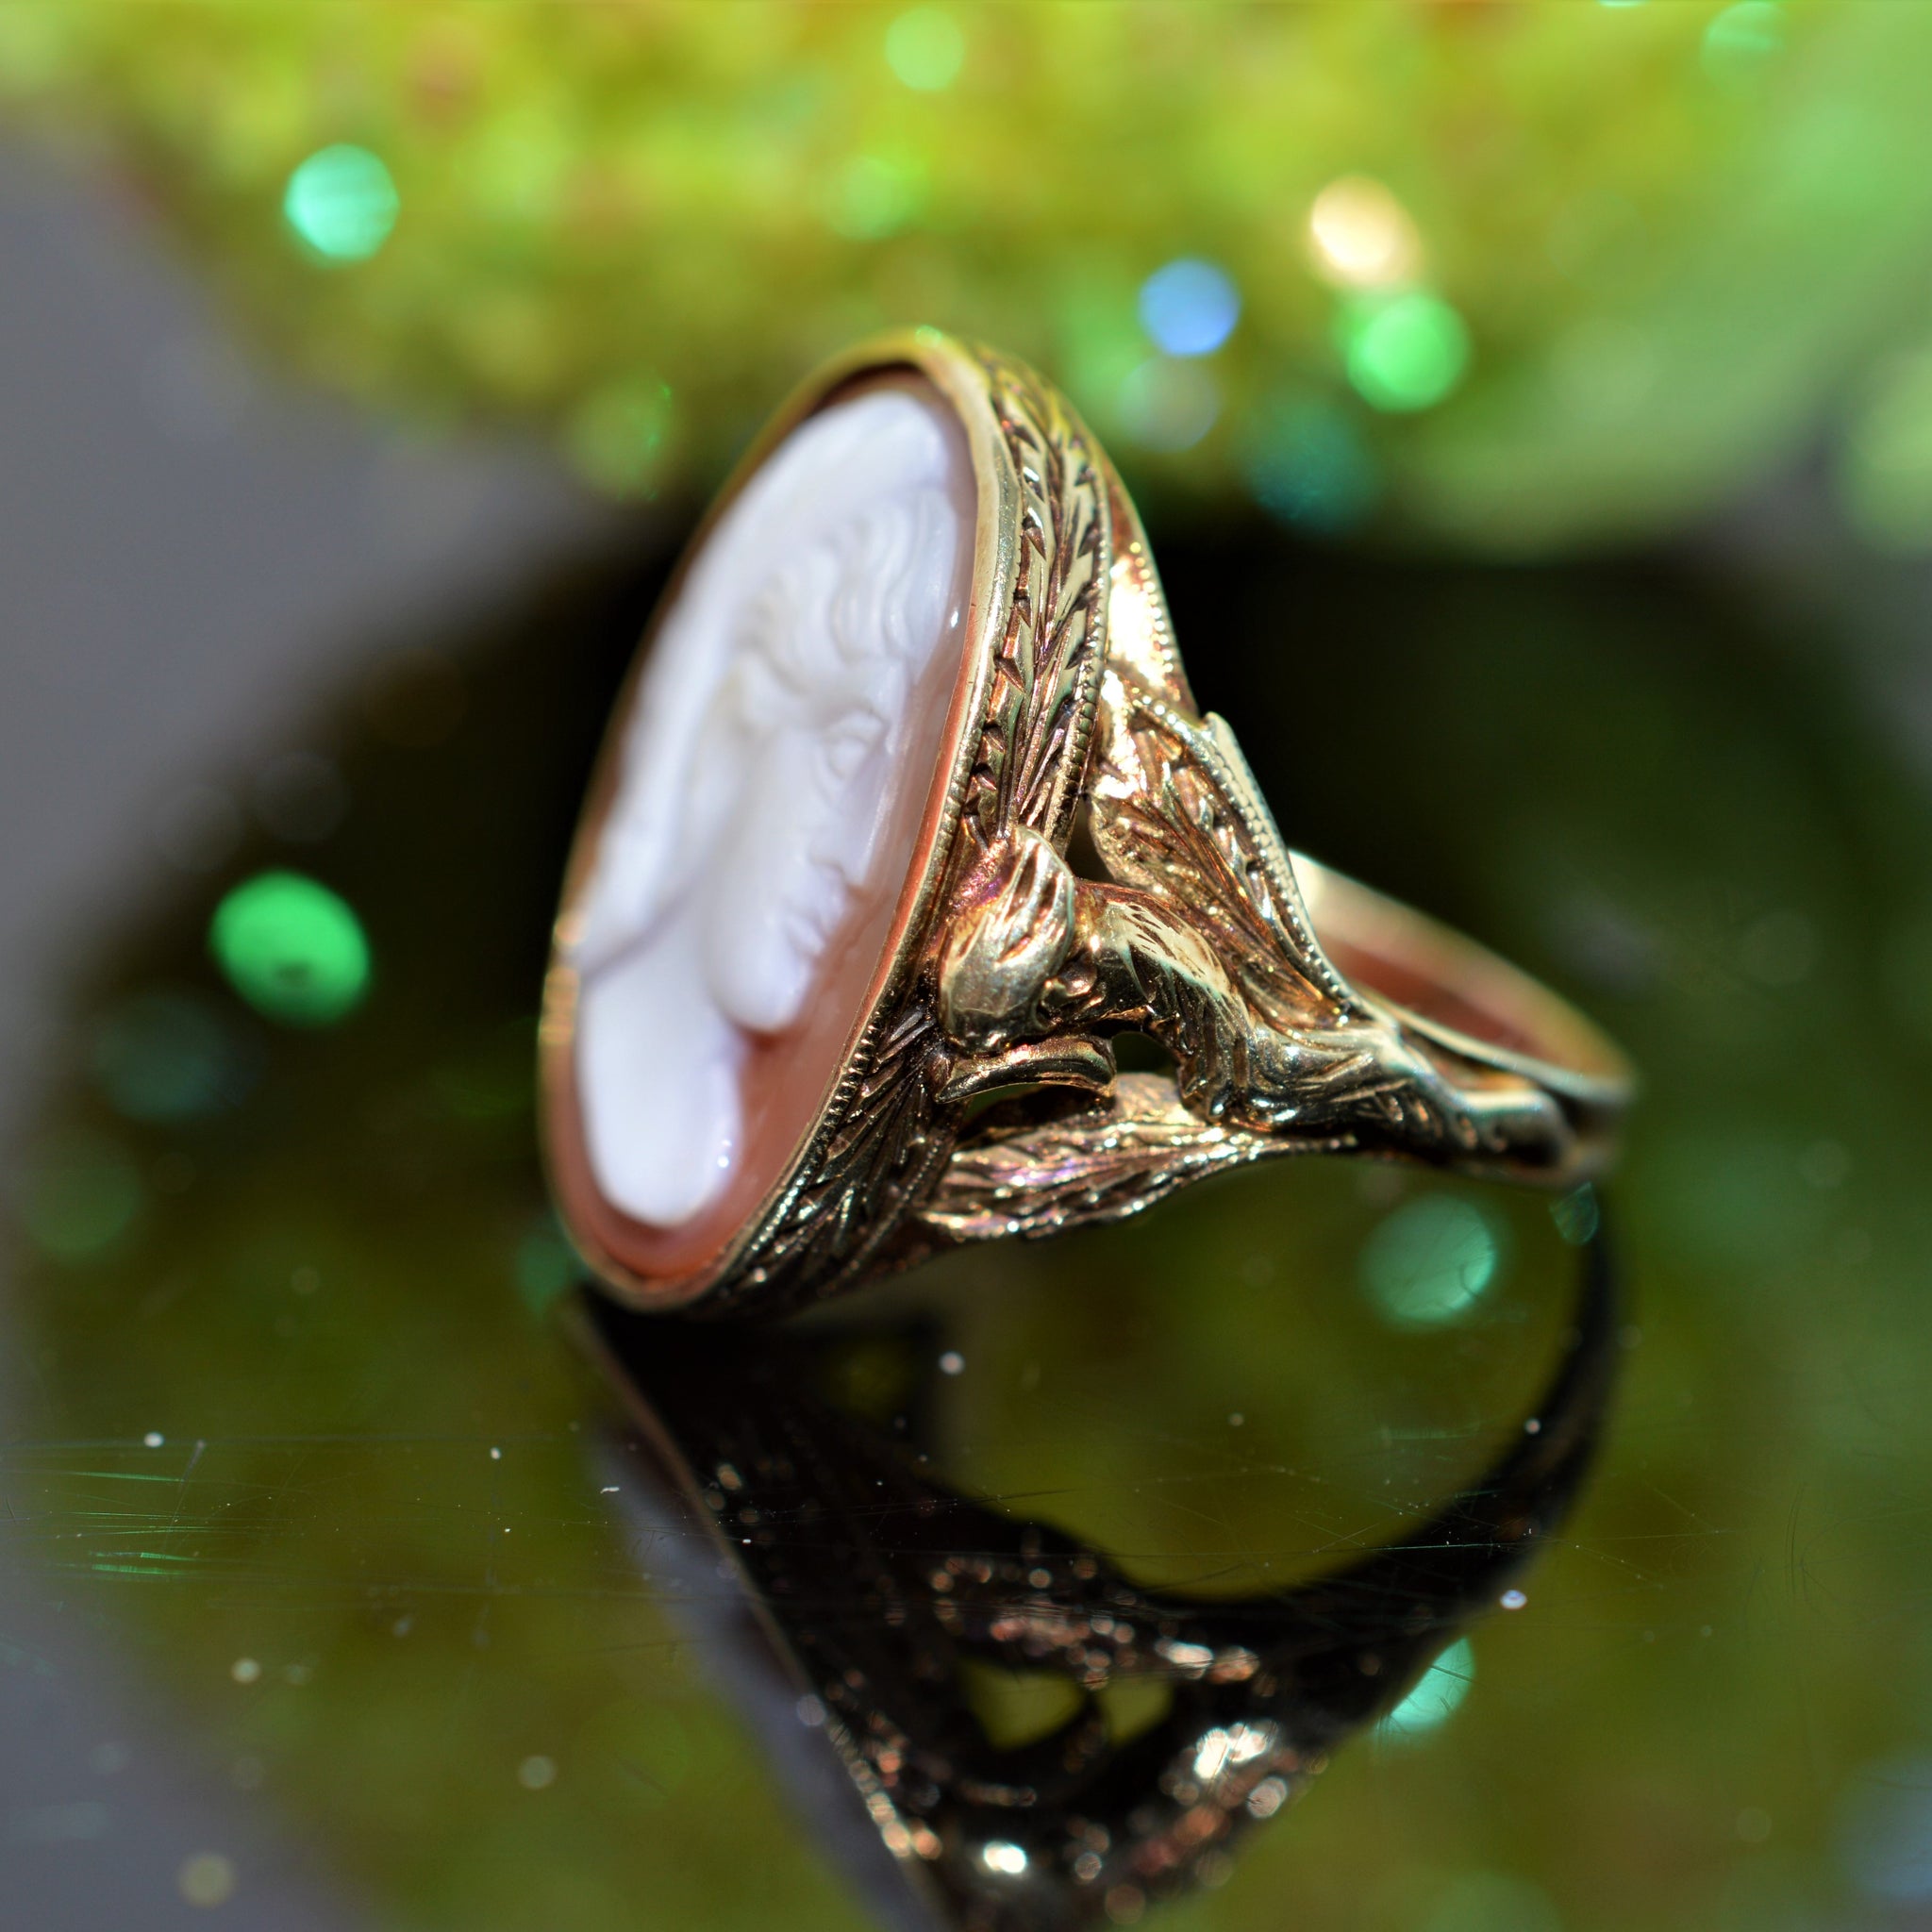 C. 1950 Vintage White Agate and Black Onyx Cameo Ring with Diamond Accent  in 14kt White Gold. Size 6 | Ross-Simons